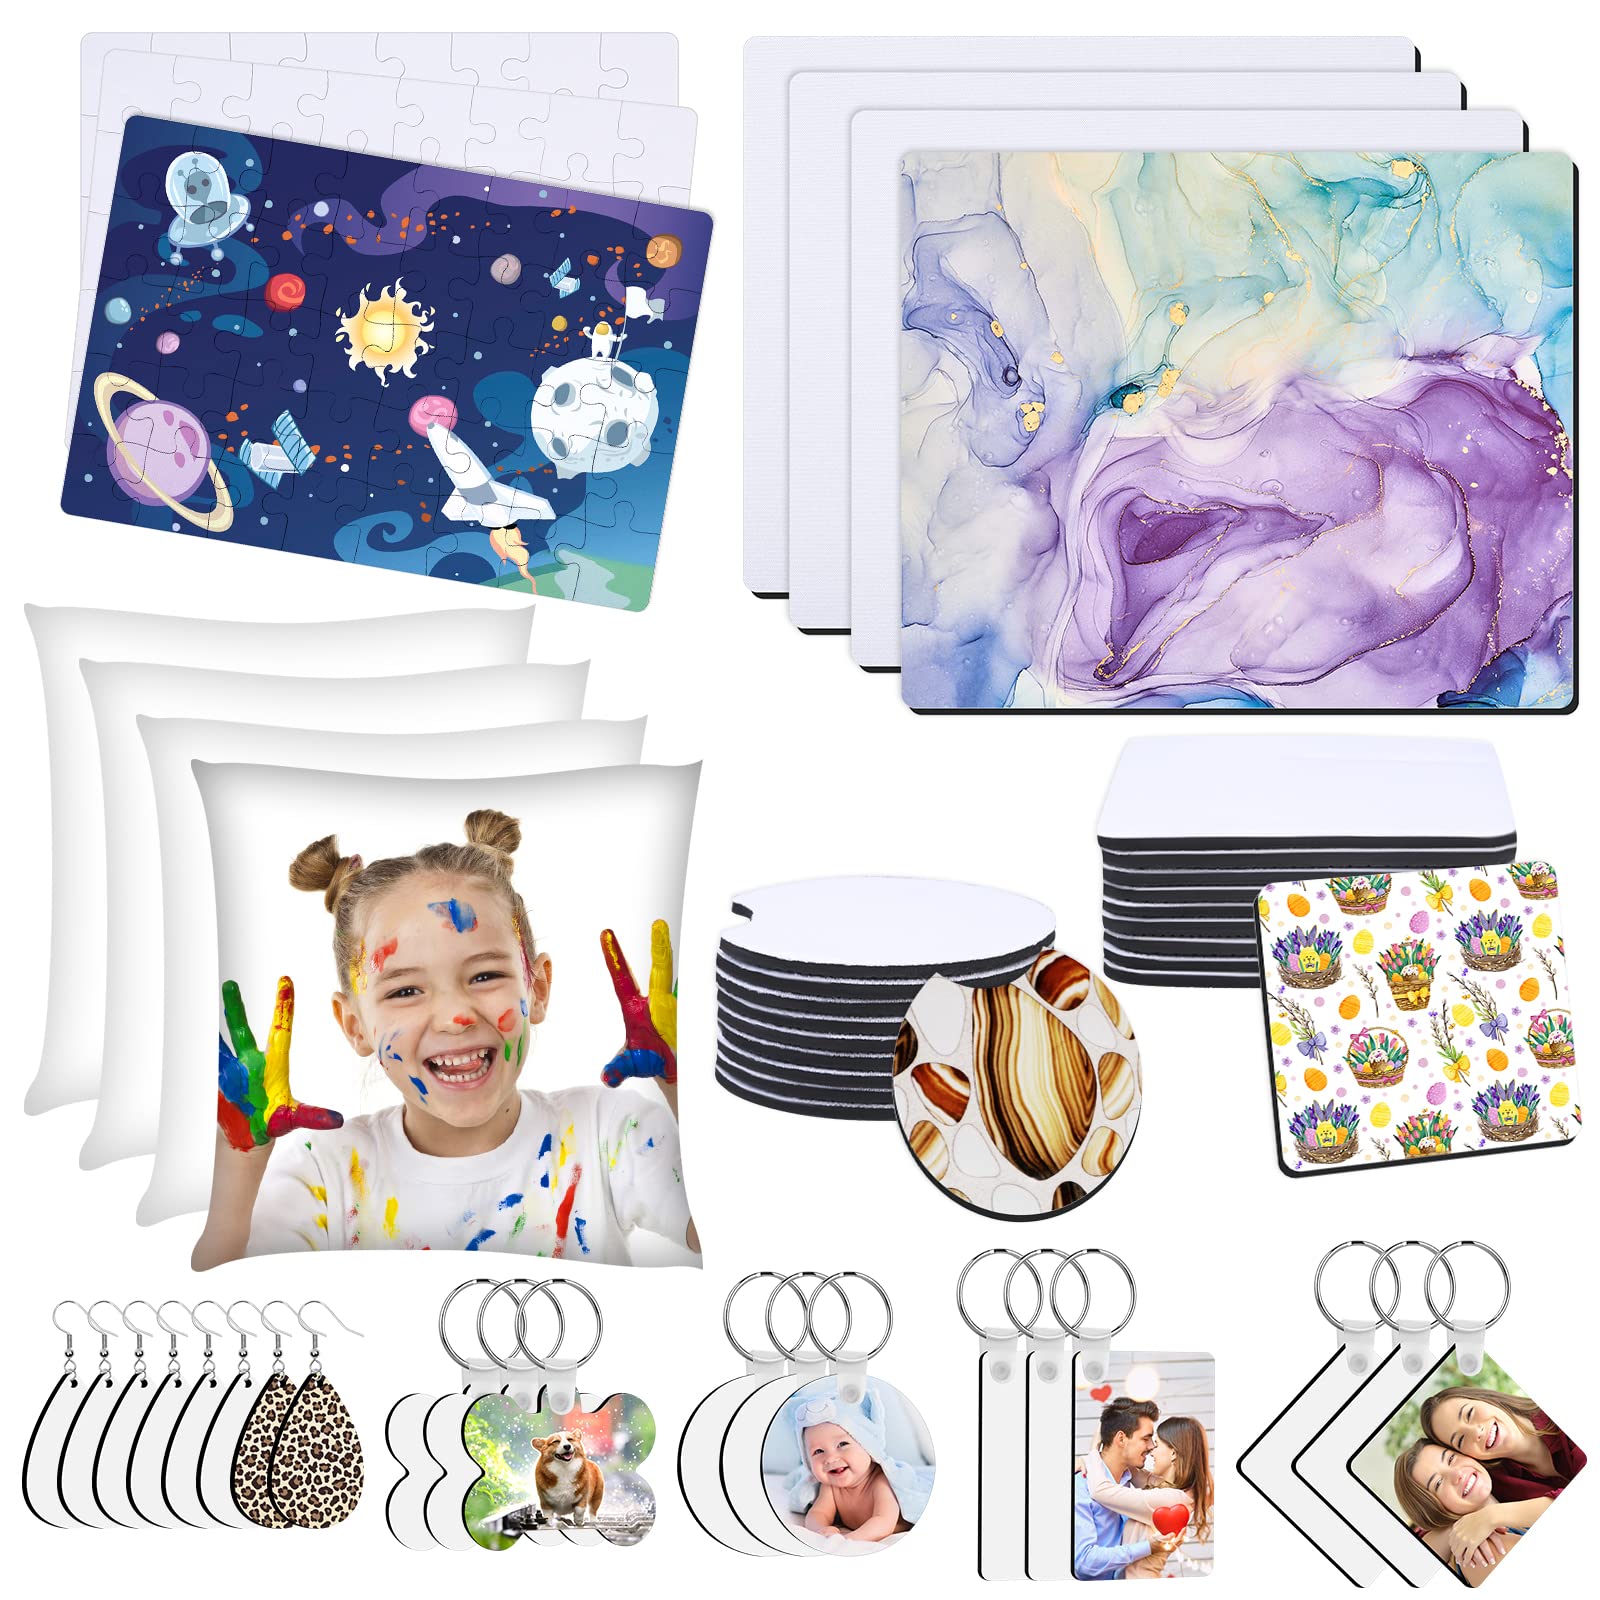 82 PCS Sublimation Blanks Products Set, Modacraft DIY Sublimation Starter  Kit with 20 Car Coasters, 12 Keychains, 8 Earrings, 4 Mouse Pads, 3 Pillow  Covers, 3 Puzzles 82PCS